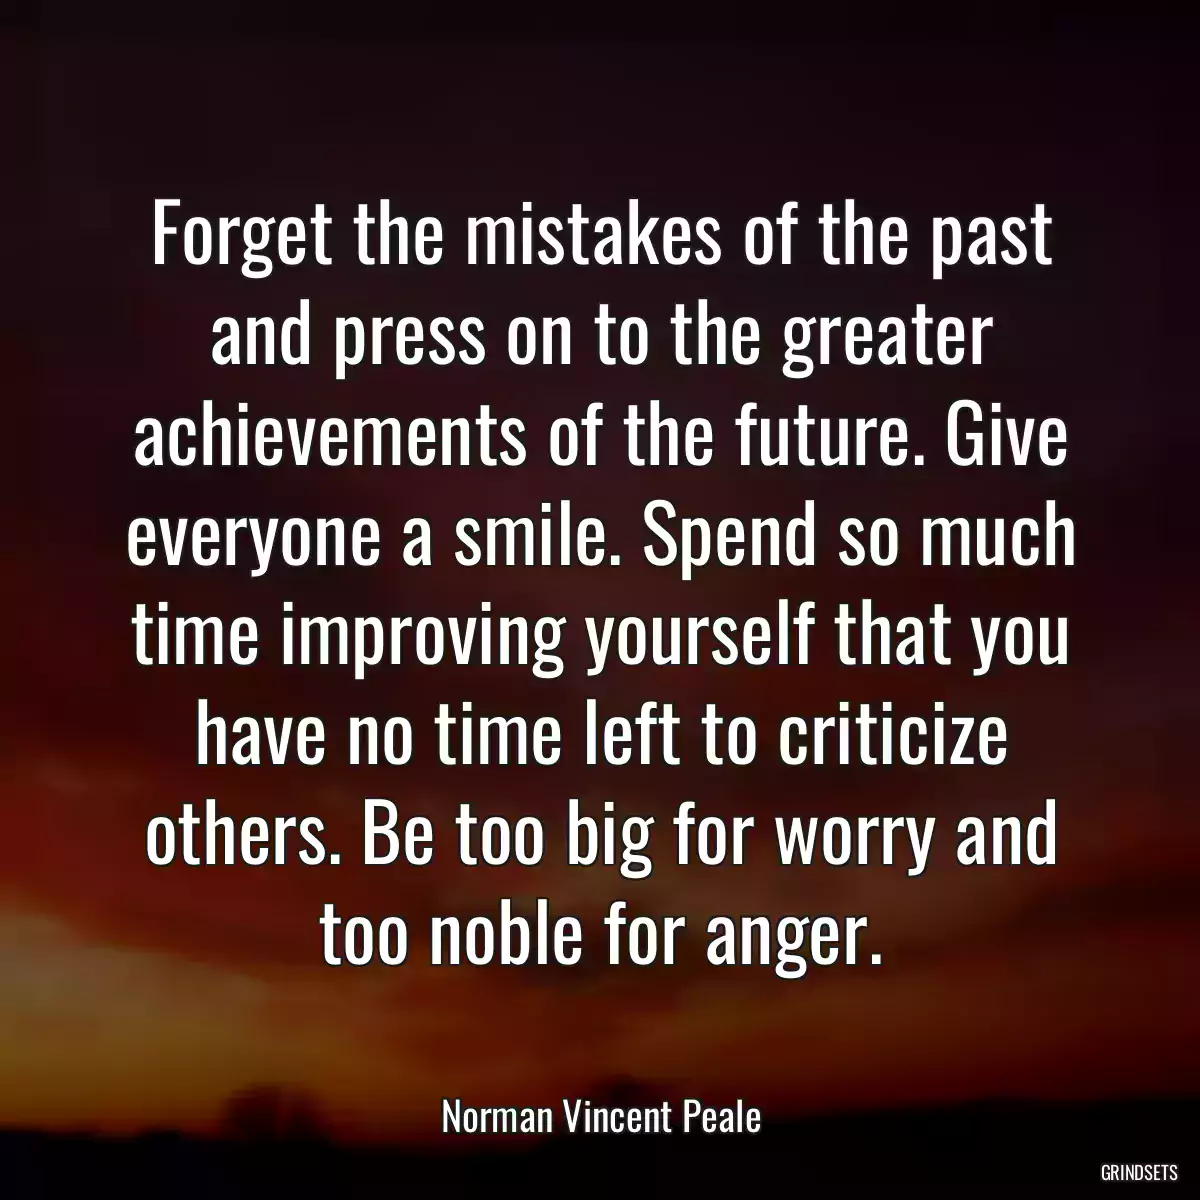 Forget the mistakes of the past and press on to the greater achievements of the future. Give everyone a smile. Spend so much time improving yourself that you have no time left to criticize others. Be too big for worry and too noble for anger.